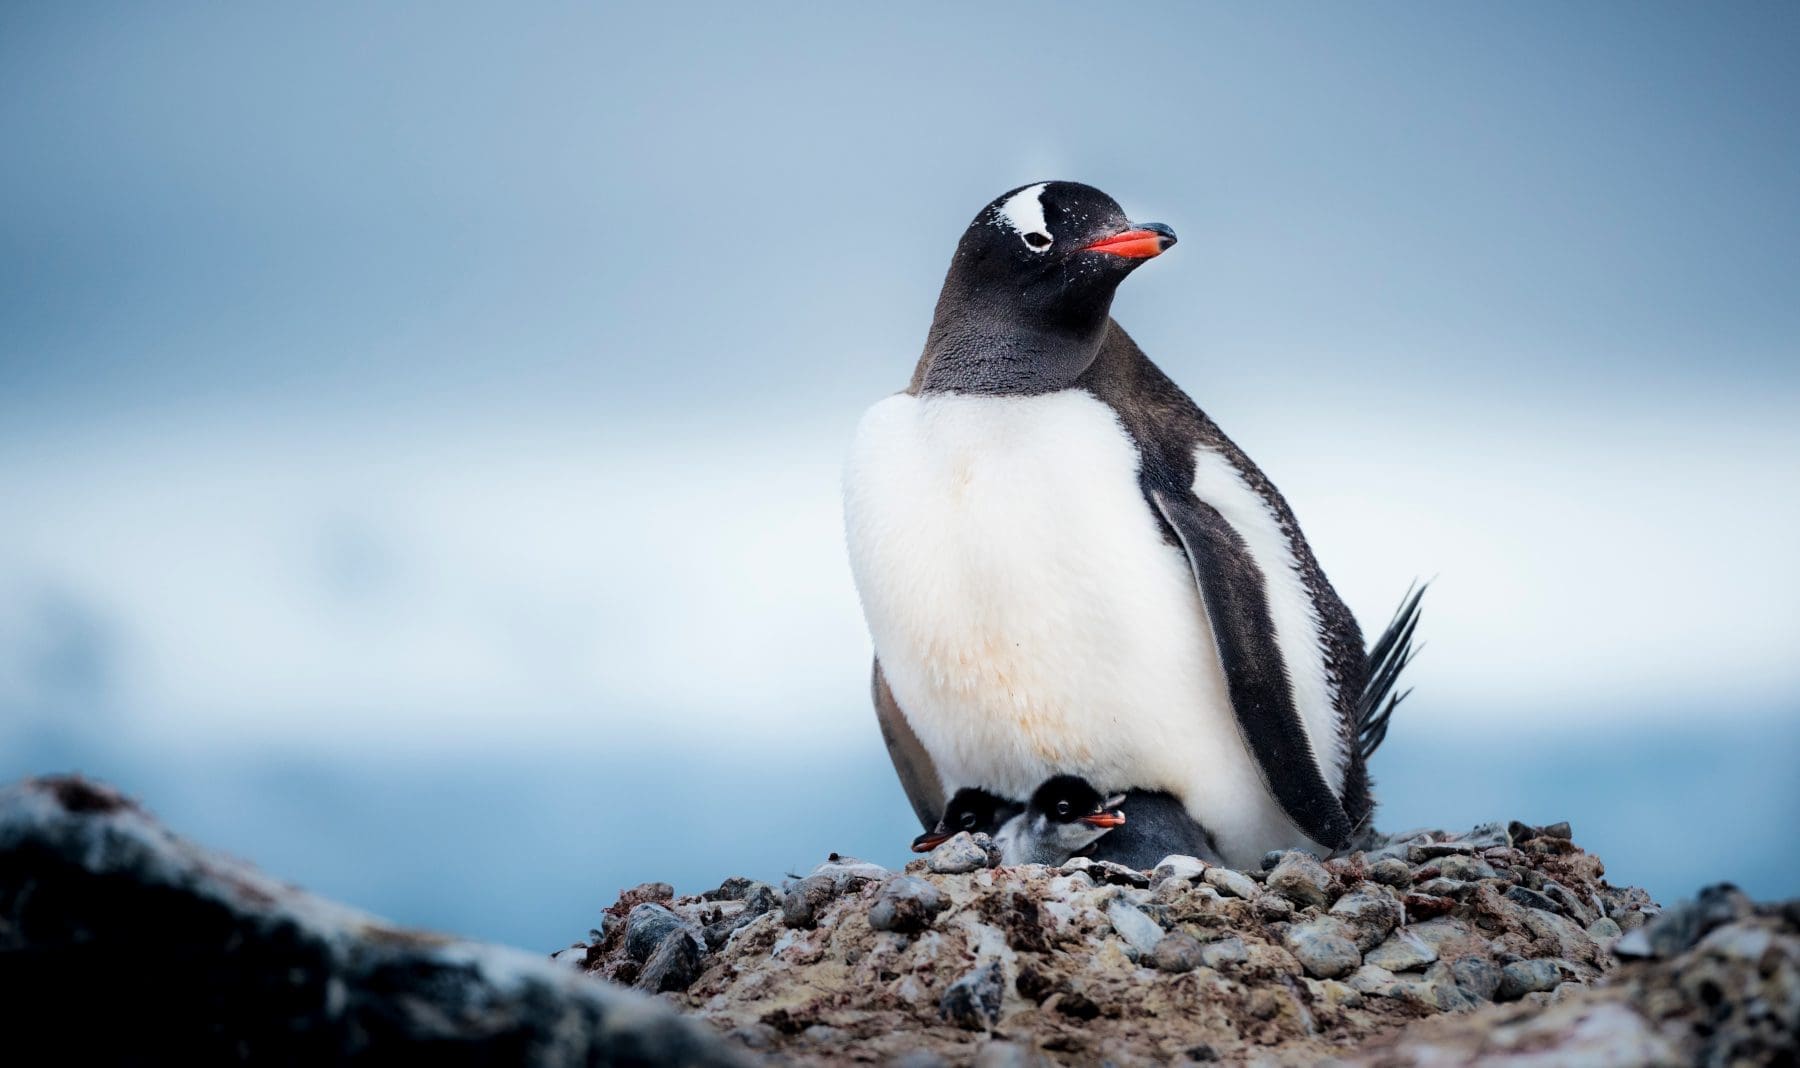 Travel to Antarctica as Flying Penguin Officer